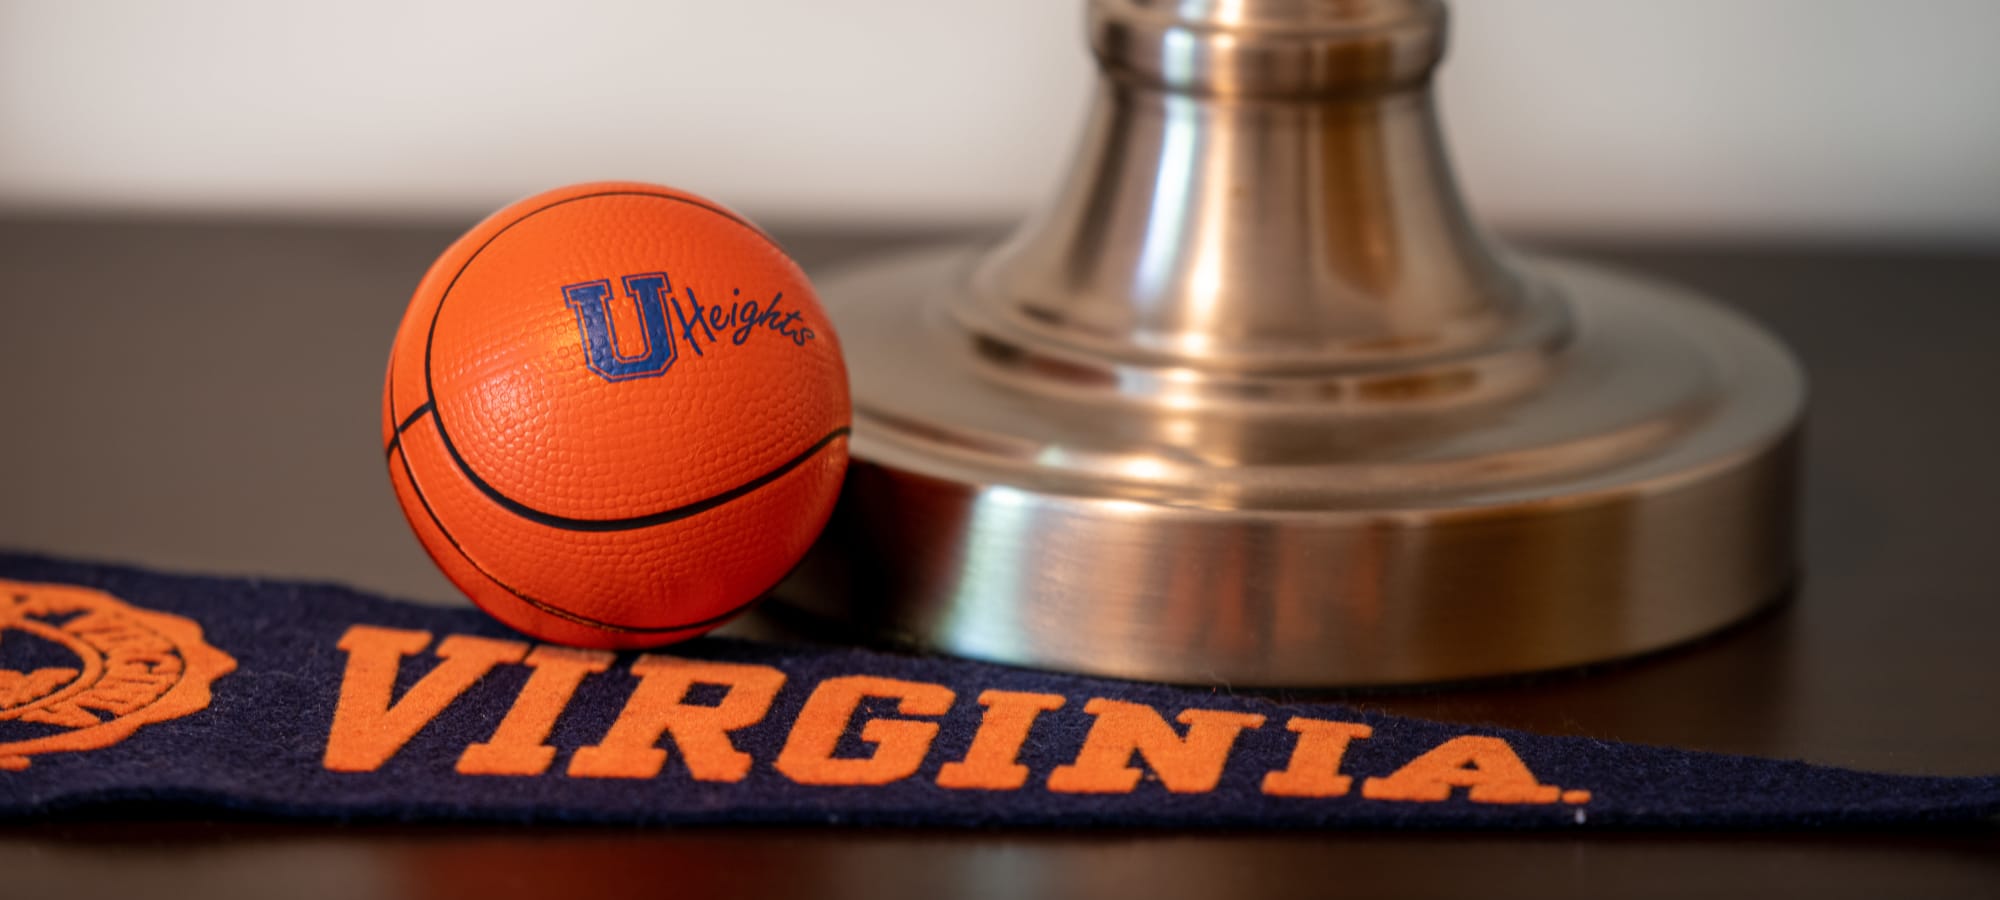 A small basketball with a college pennant next to it on a desk University Heights in Charlottesville, Virginia